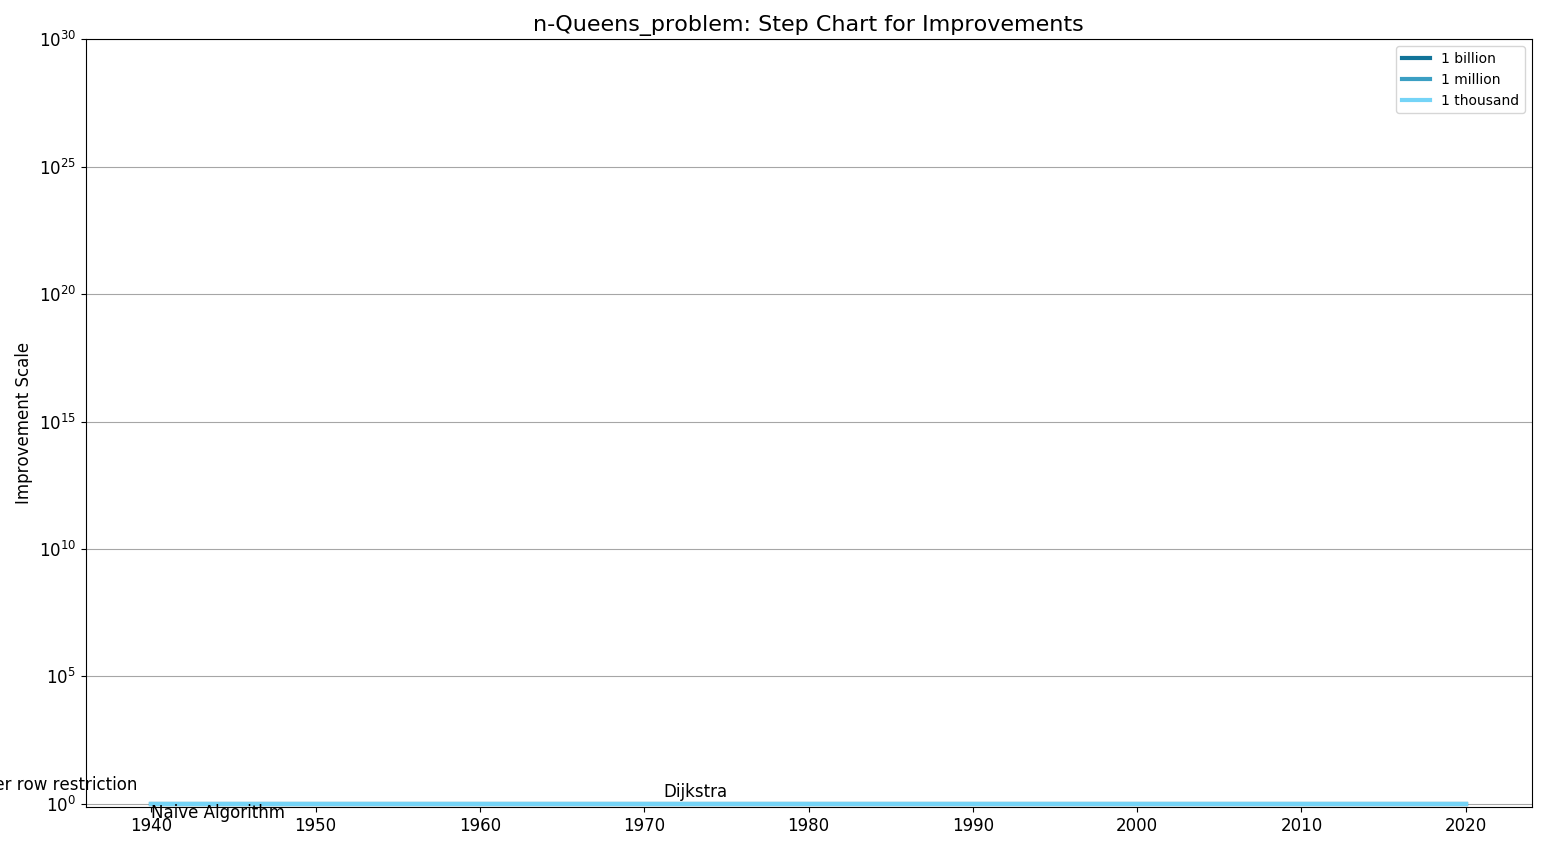 File:N-Queens problemStepChart.png